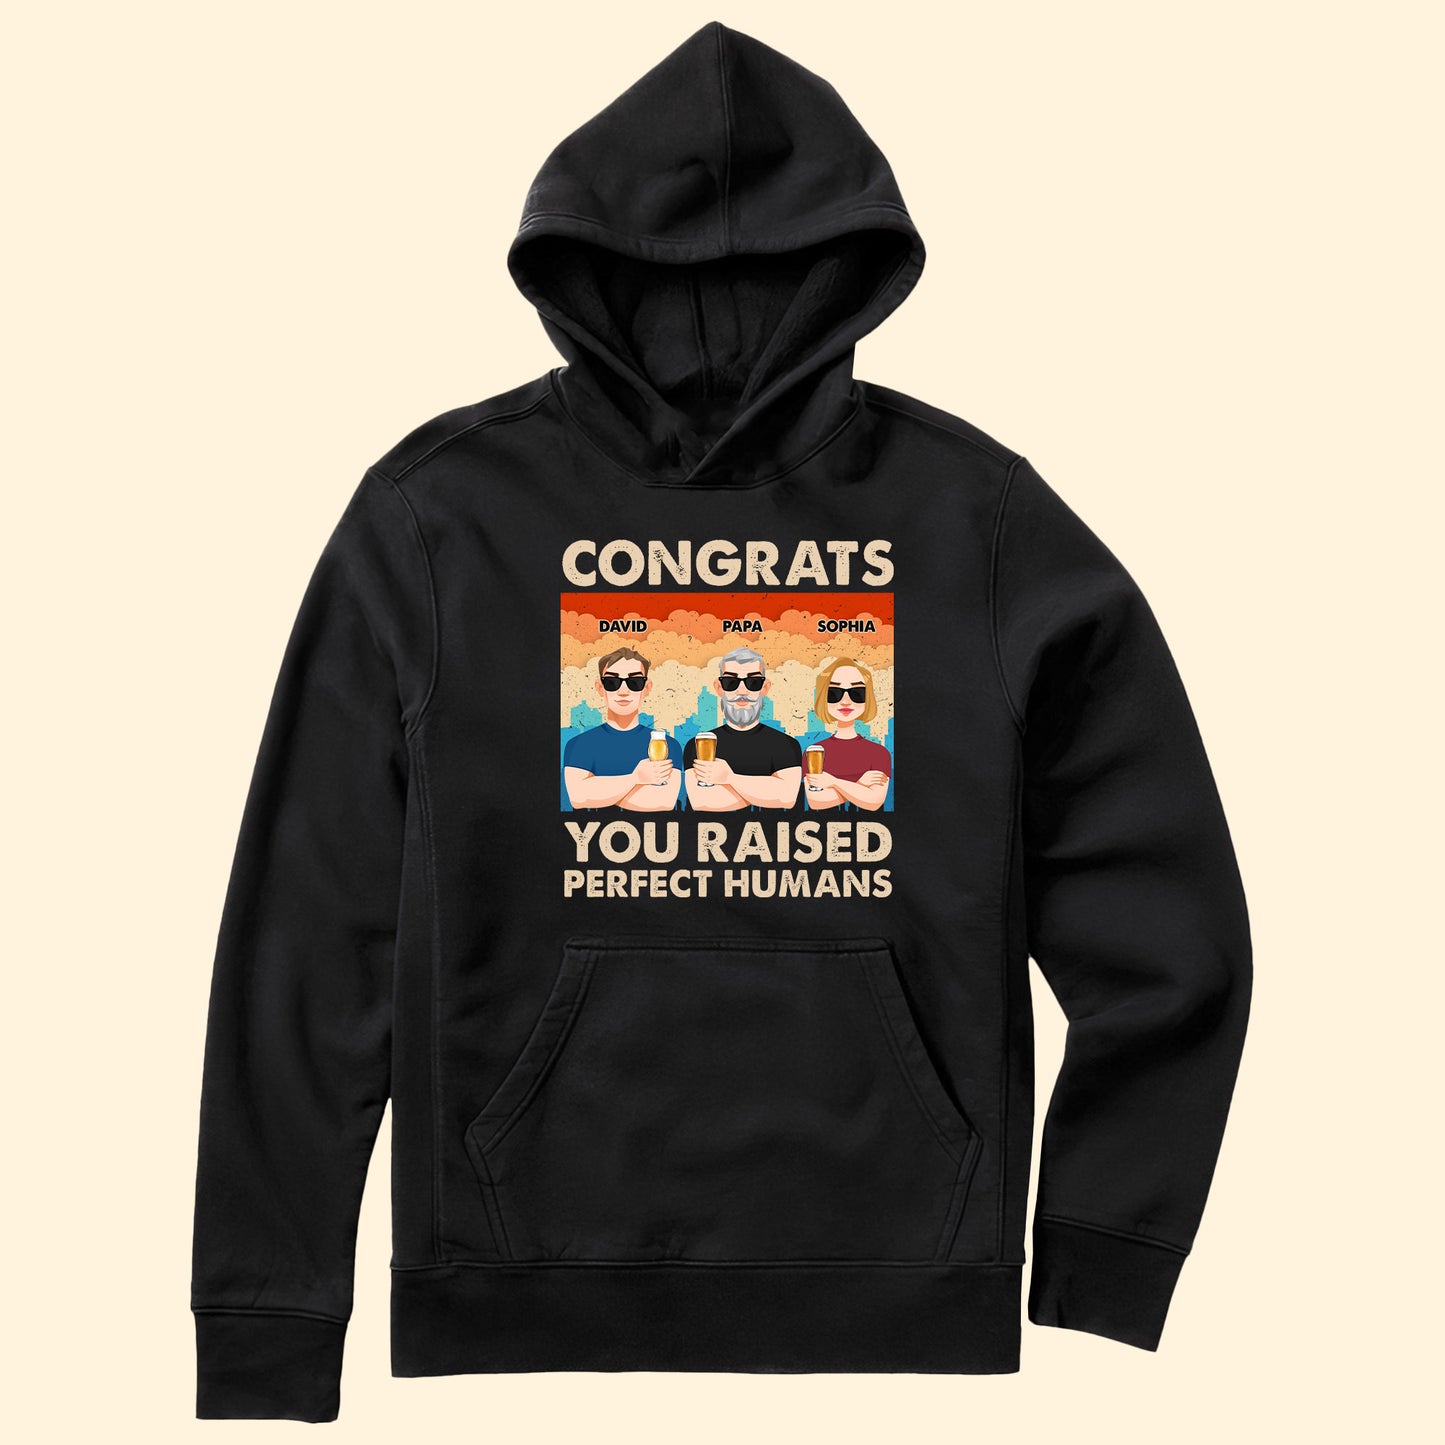 Congrats You Raised Perfect Humans - Personalized Shirt